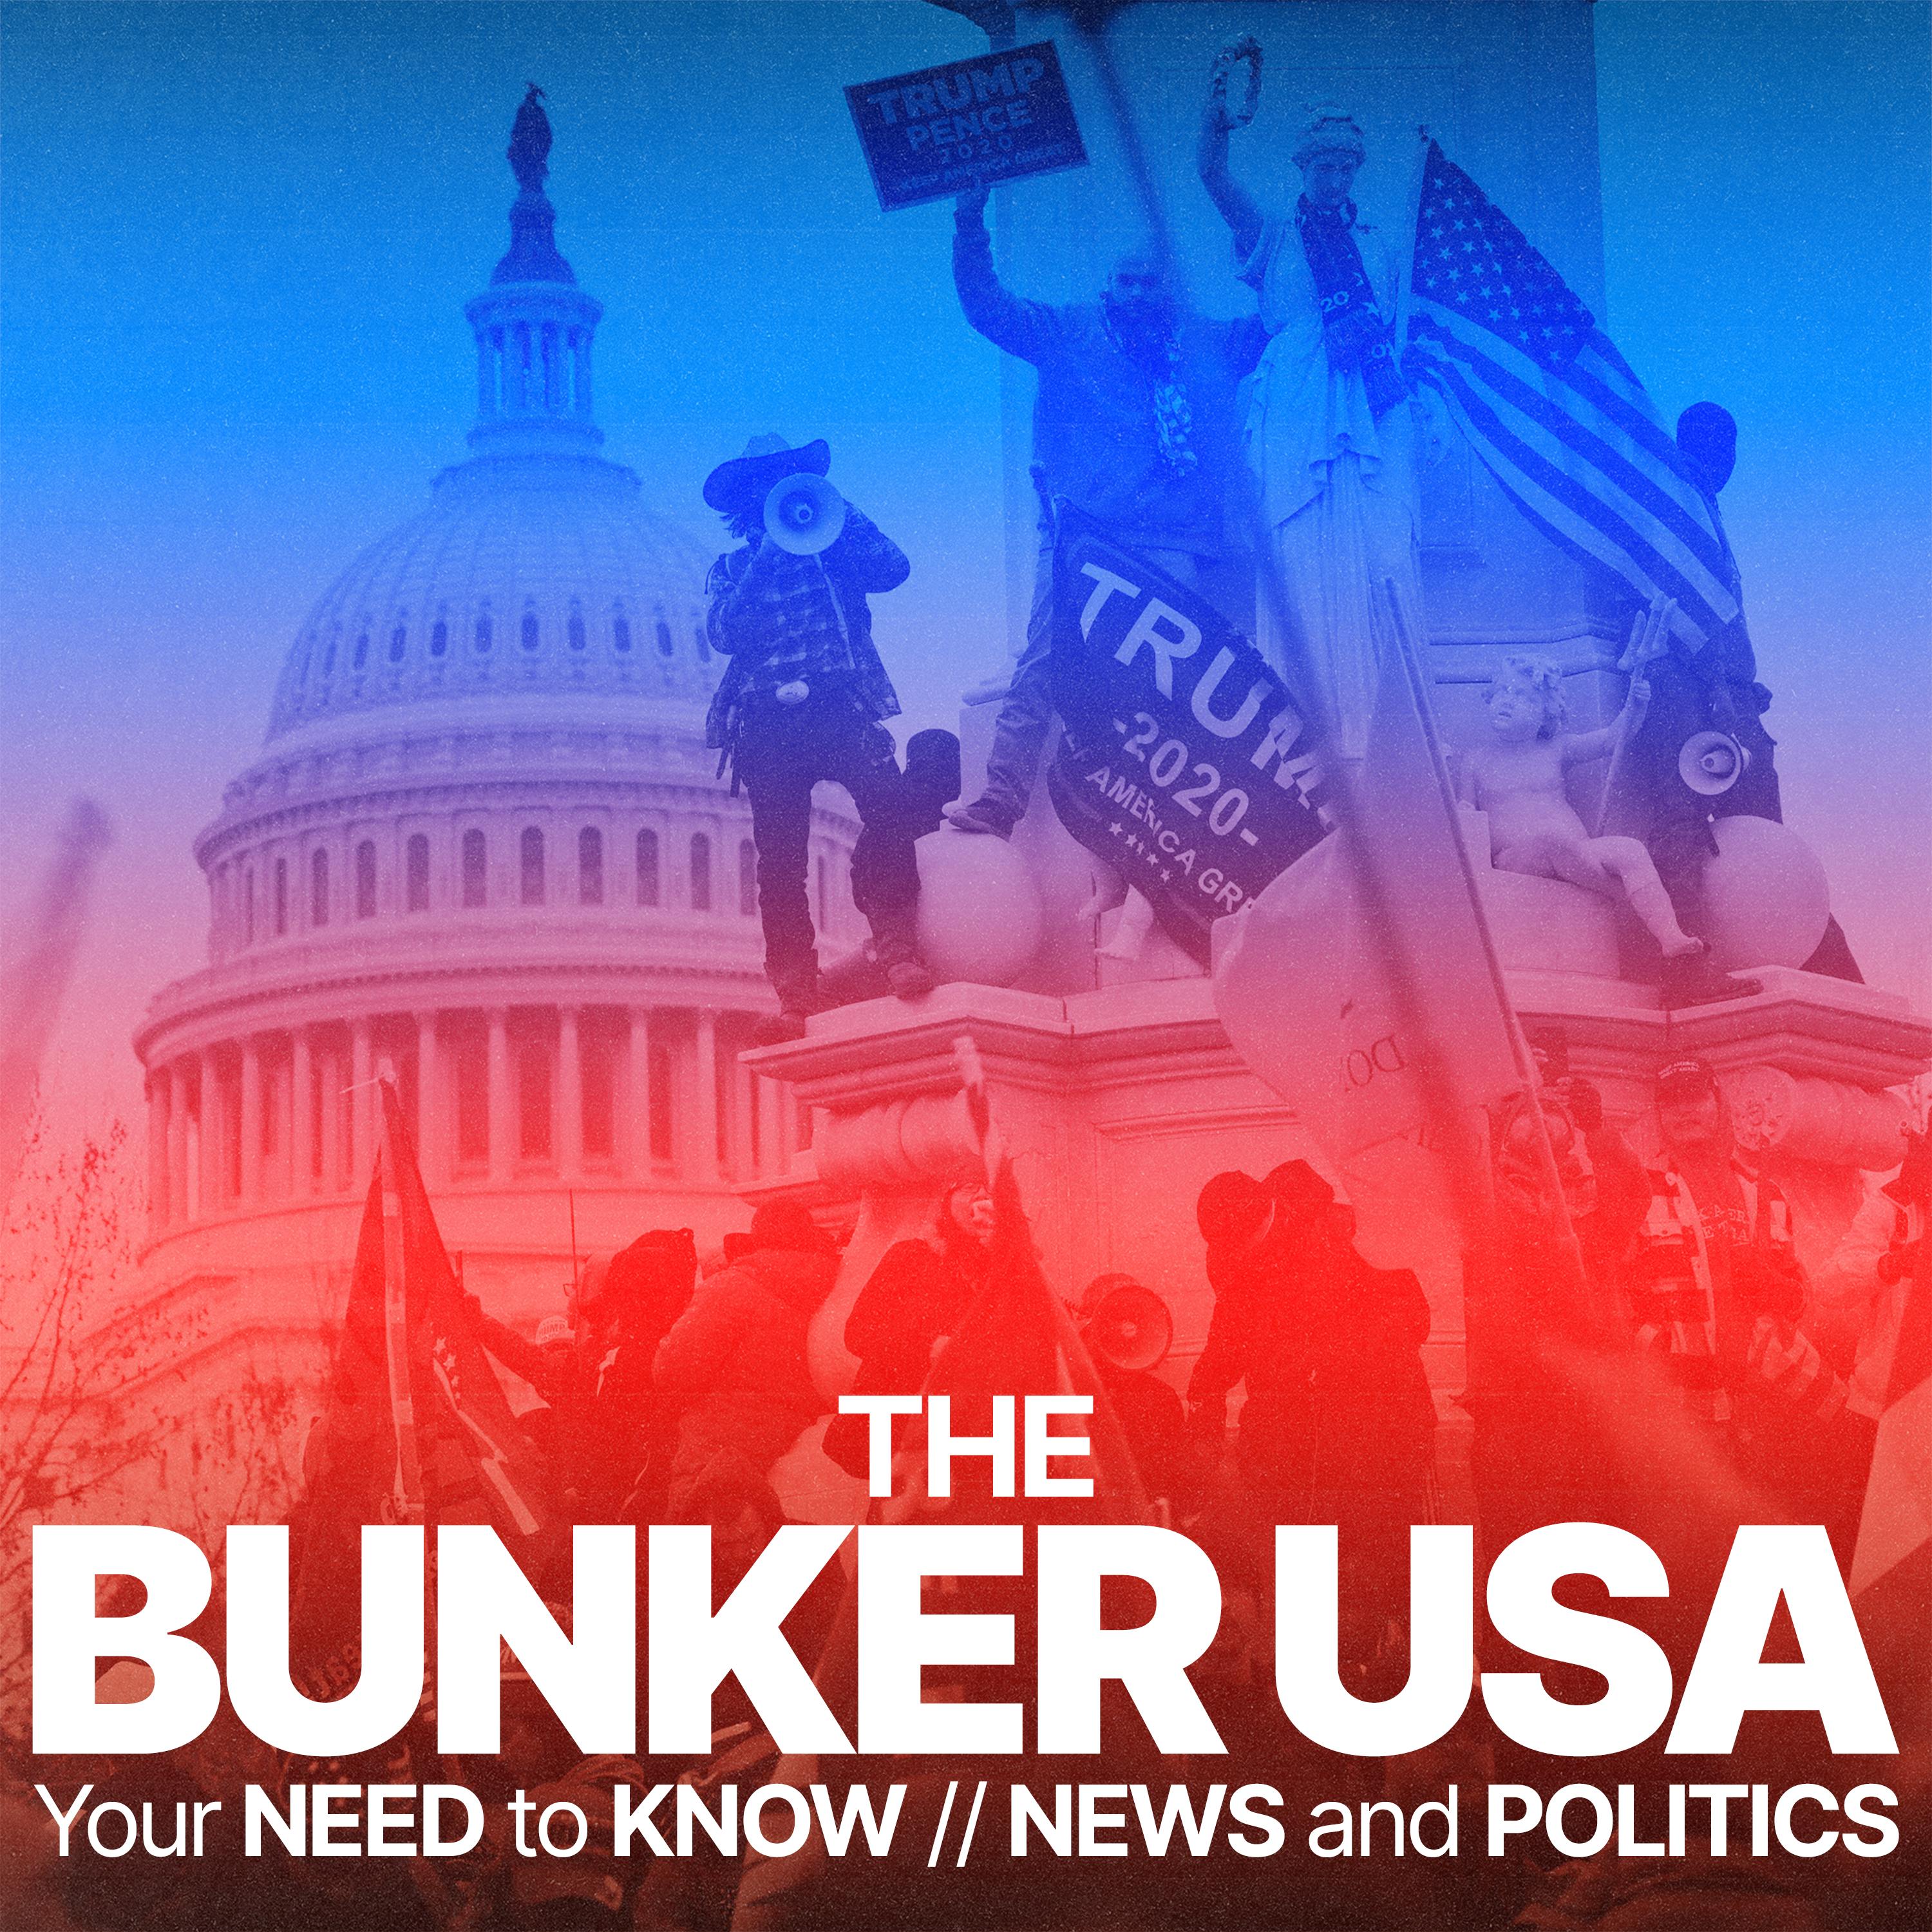 Bunker USA: Make America hate again - How extremists turned patriotism into violence